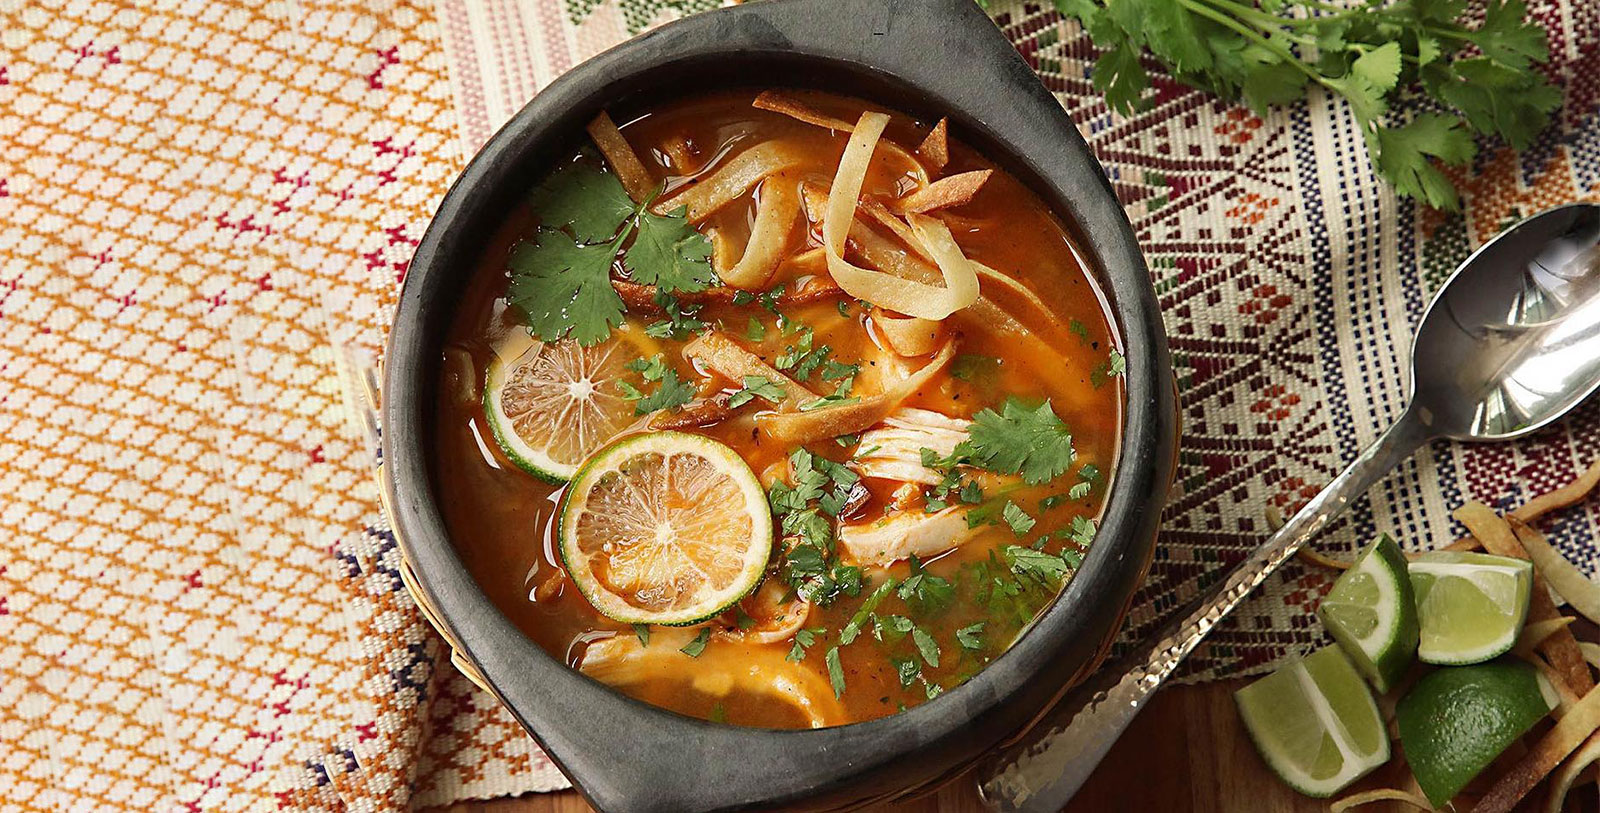 Taste Sopa de Lima, considered one of the most representative dishes of Yucatán.